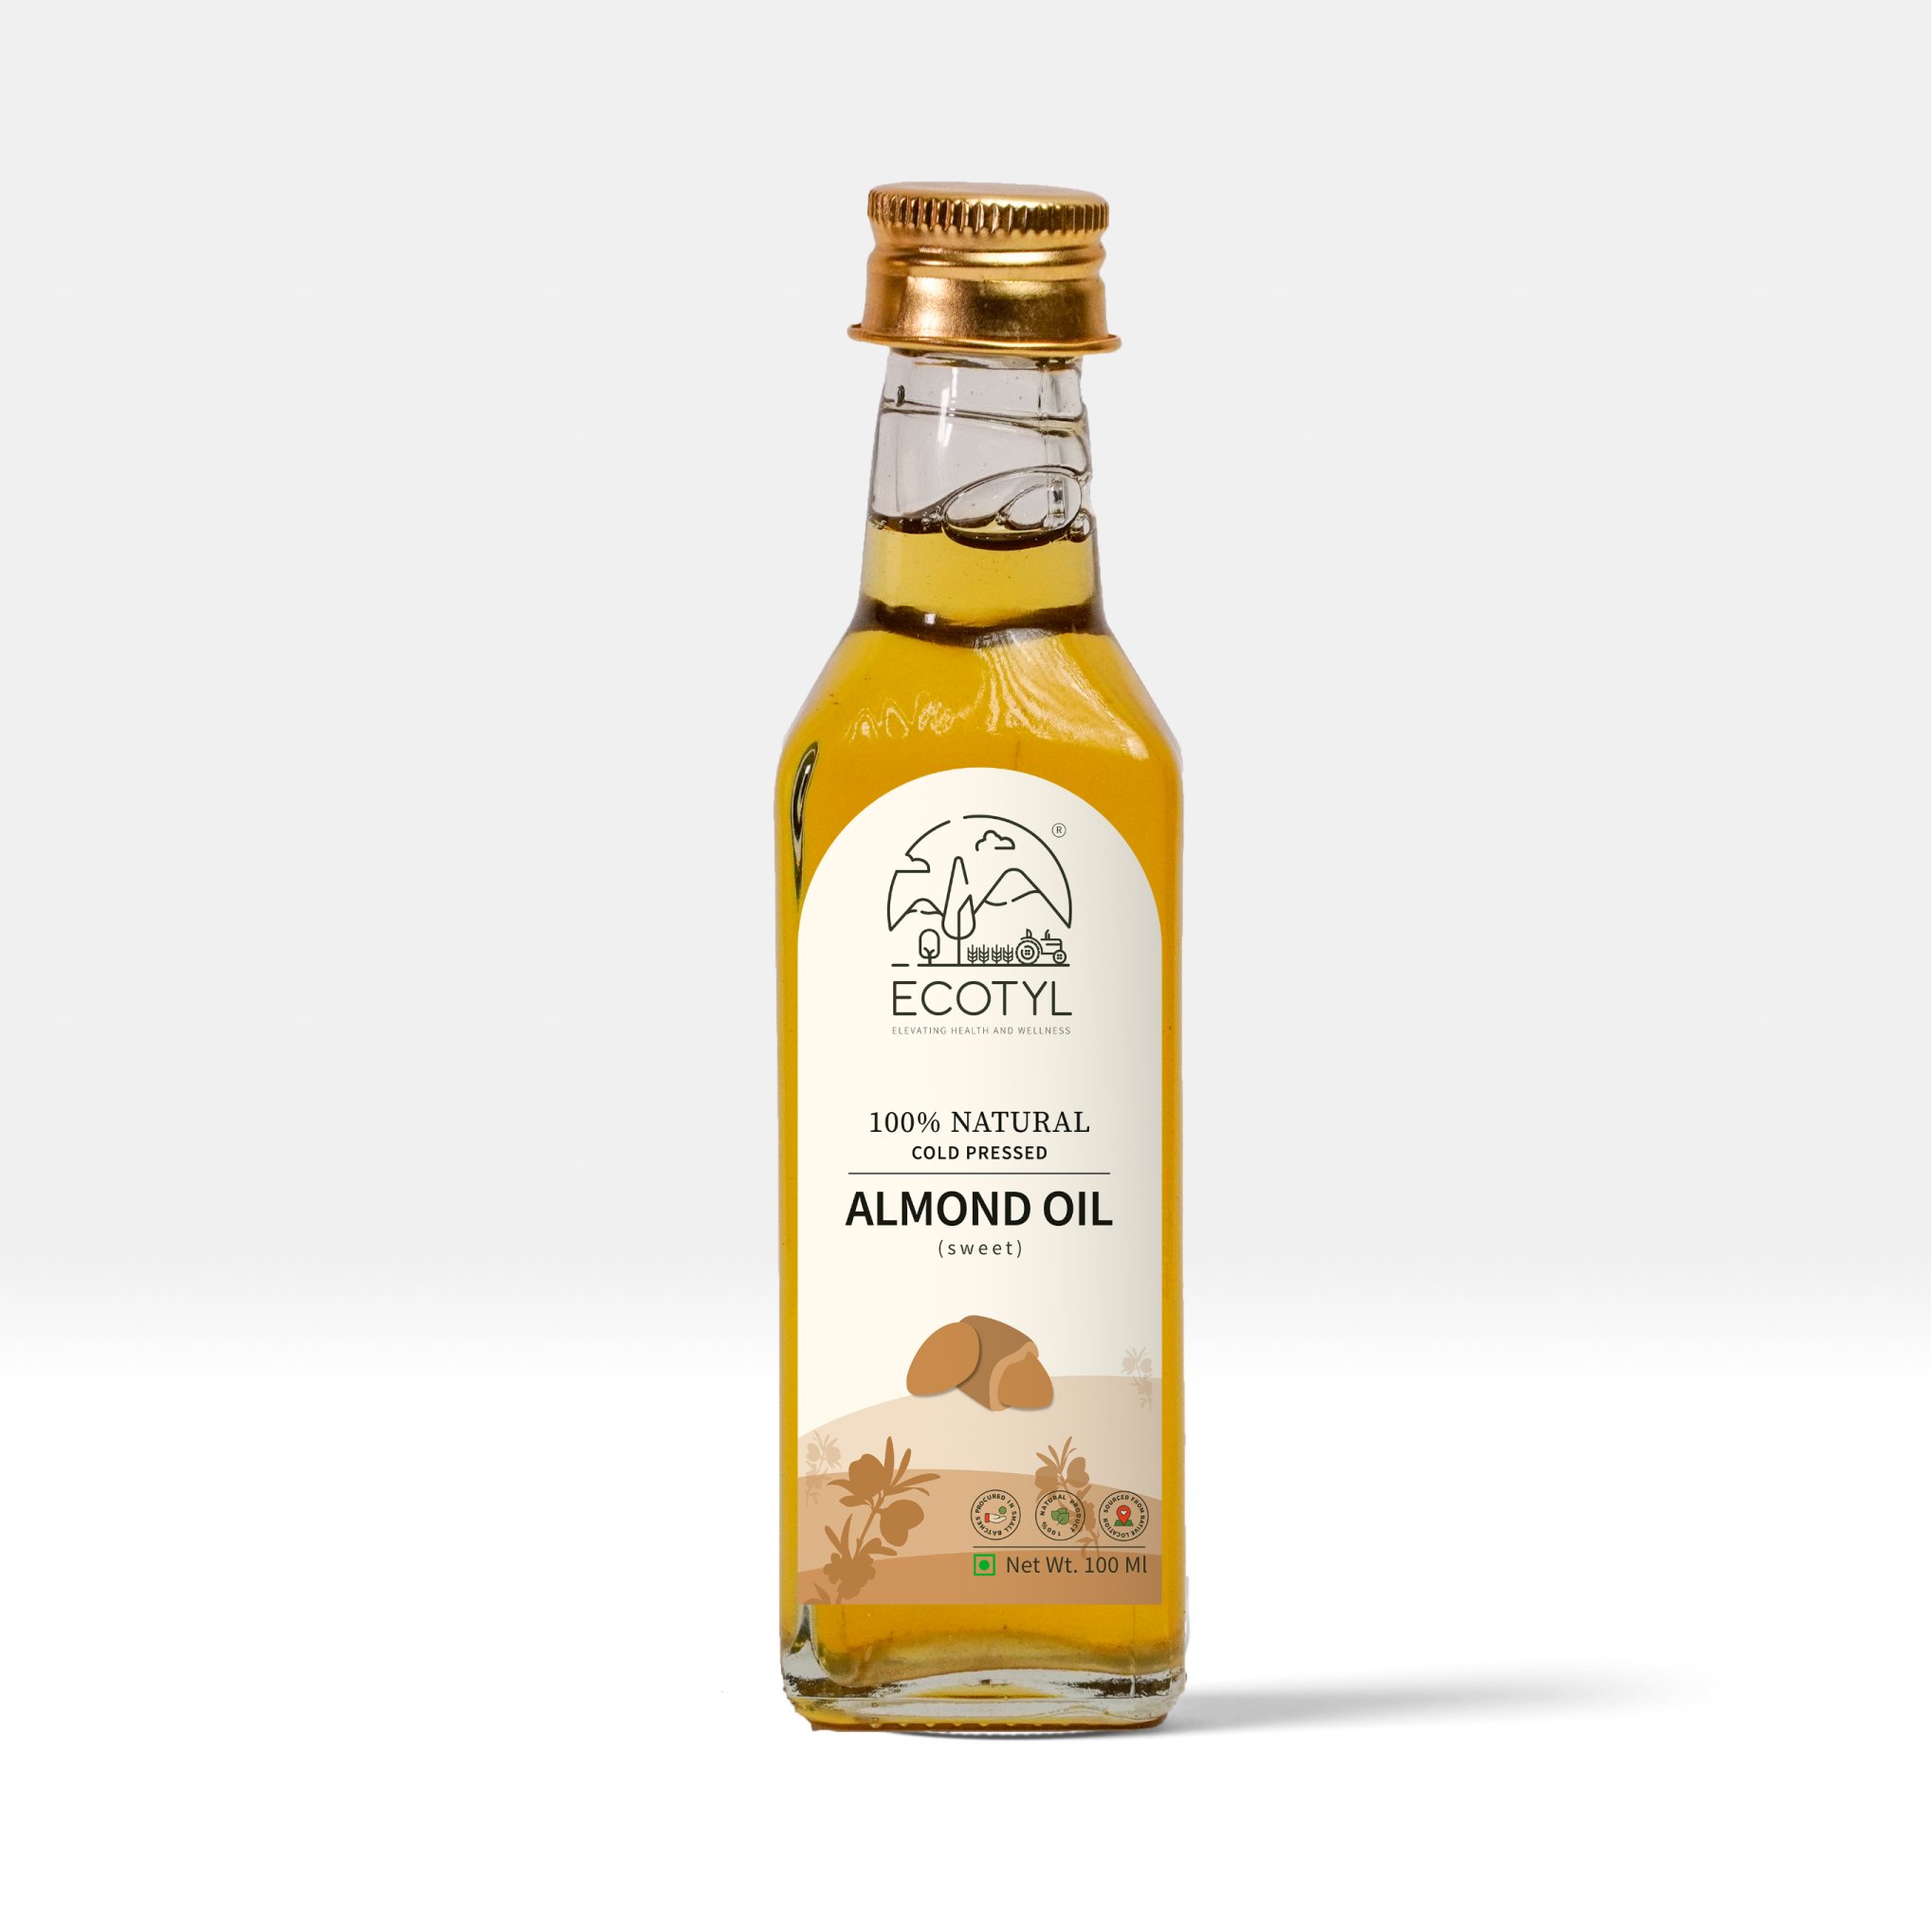 Buy Ecotyl Organic Cold-Pressed Almond Oil (Sweet)- 100g at Best Price Online